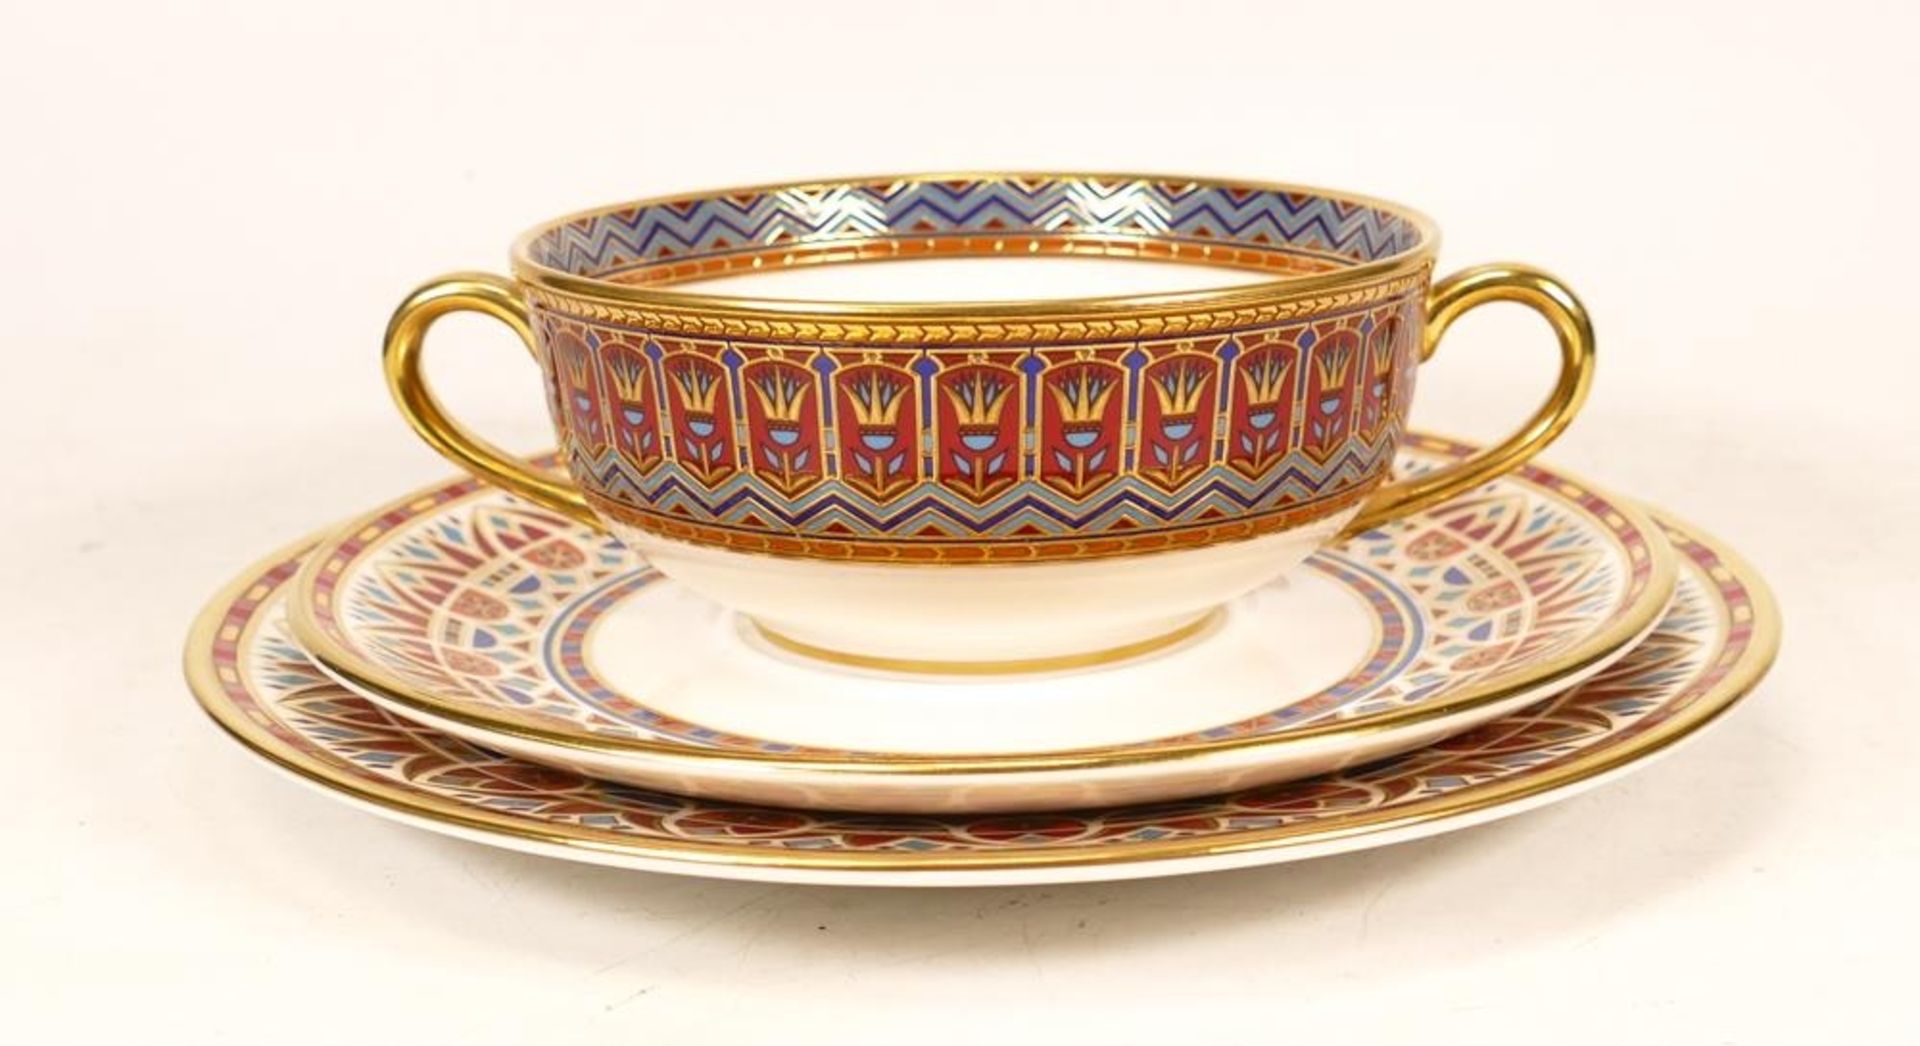 De Lamerie Fine Bone China heavily gilded Private Commission patterned Plate , Two Handled Cup